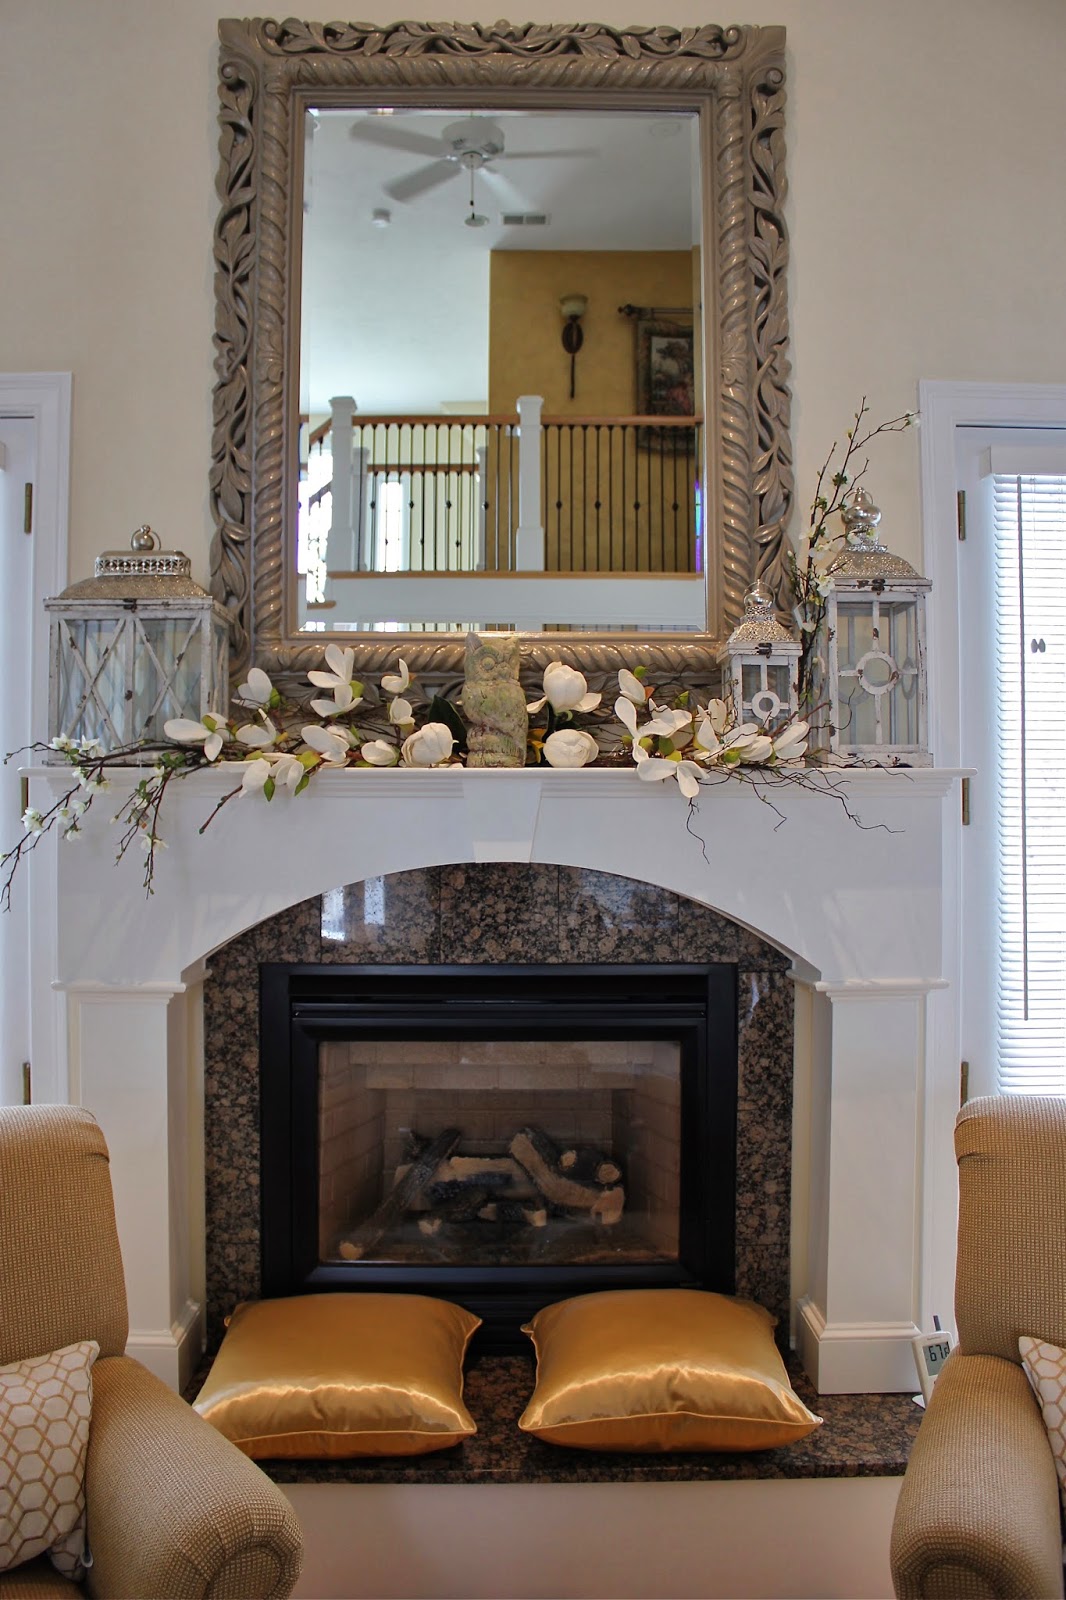 Maison Decor: Styling a mantle with lanterns and florals